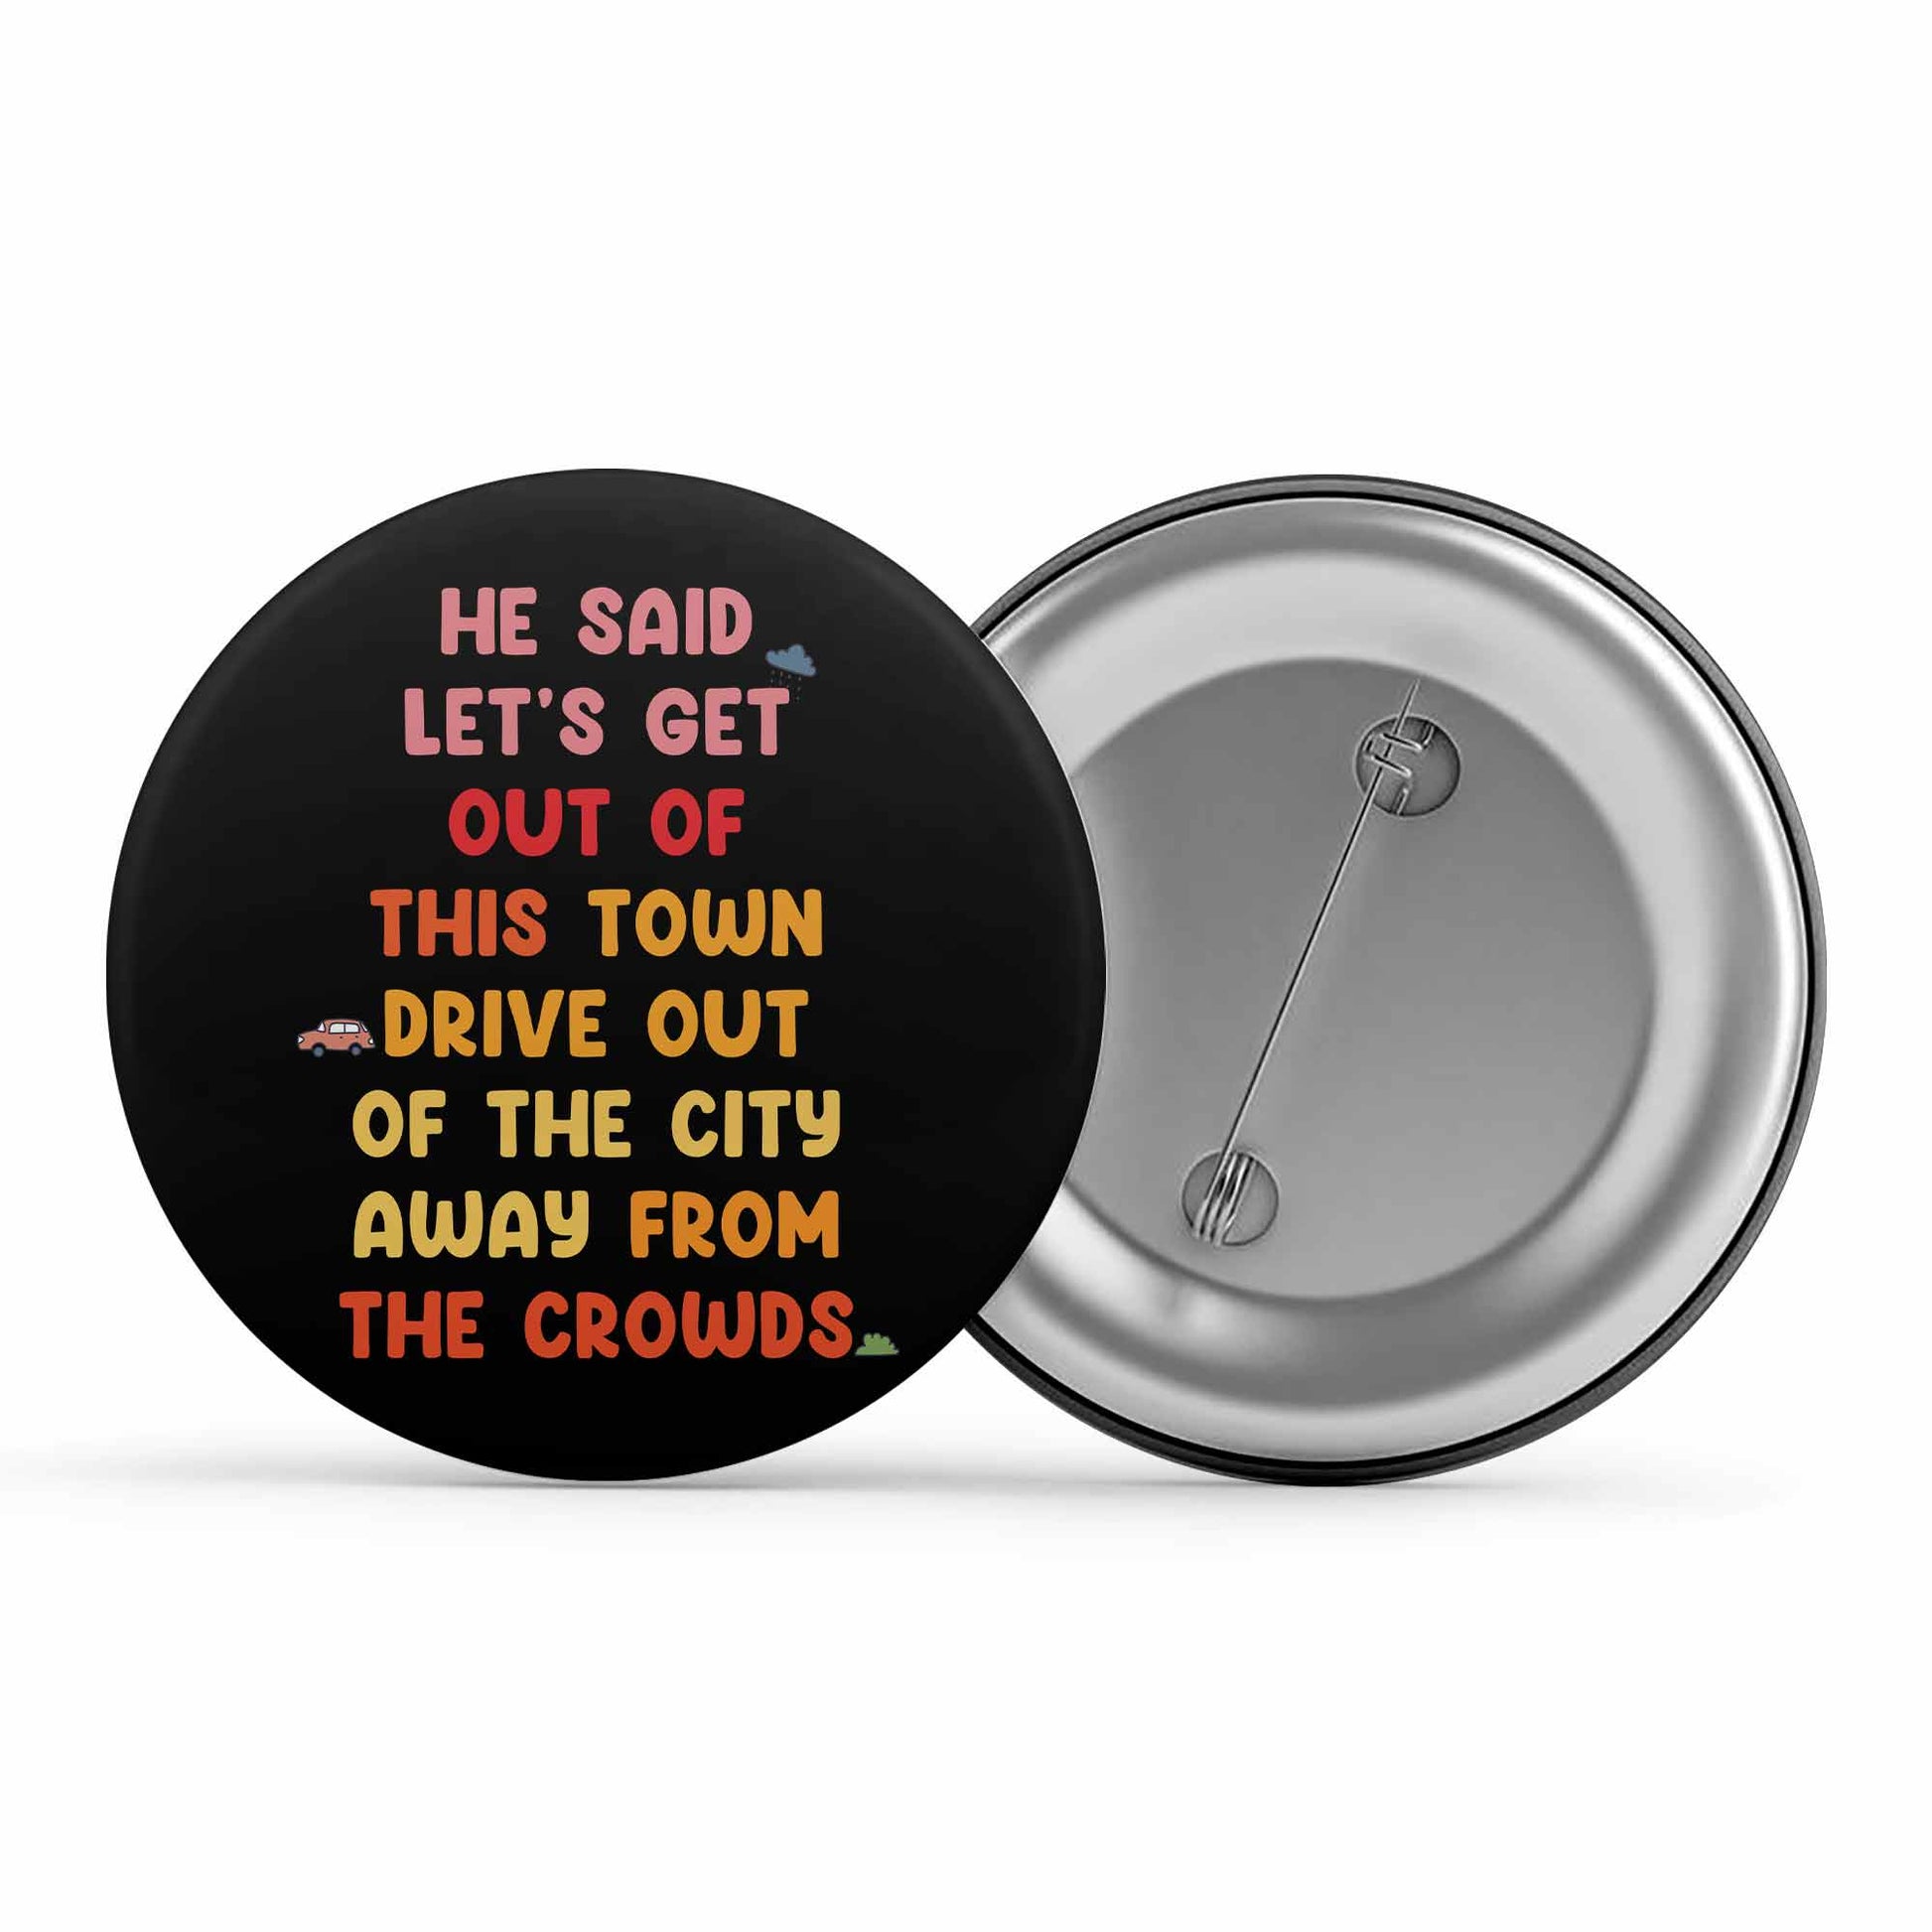 Taylor Swift Pin Button - The Tale Of Tunes